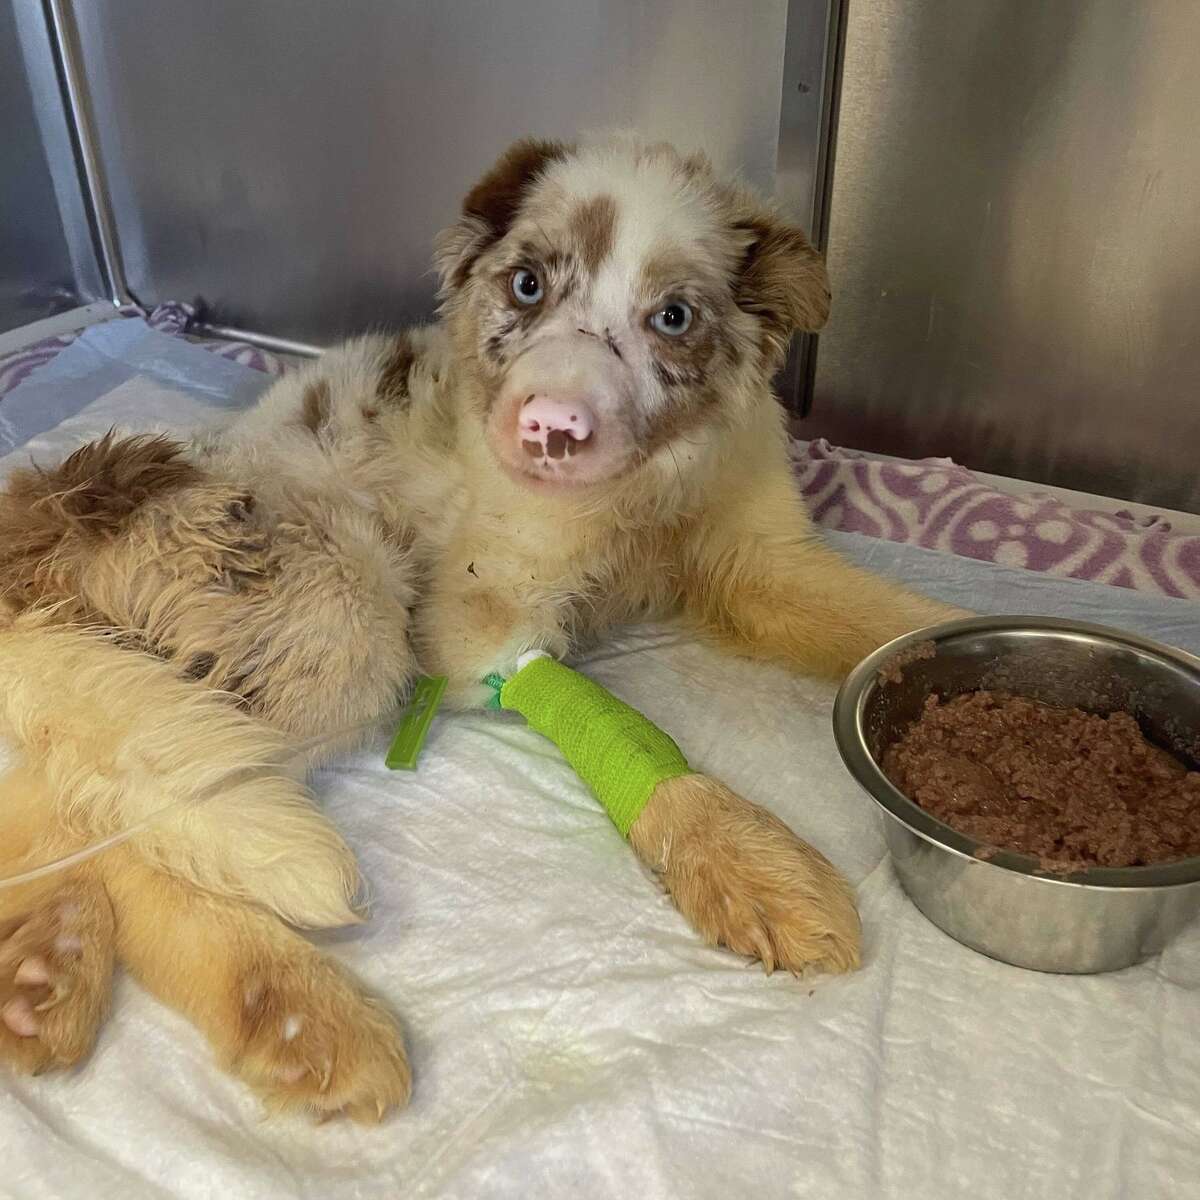 Bonnie Blue Eyes, an Australian Shepherd, was surrendered to Animal Care Services under "mysterious" circumstances. The neglect of the dog included its mouth being forced shut for a prolonged period of time.  